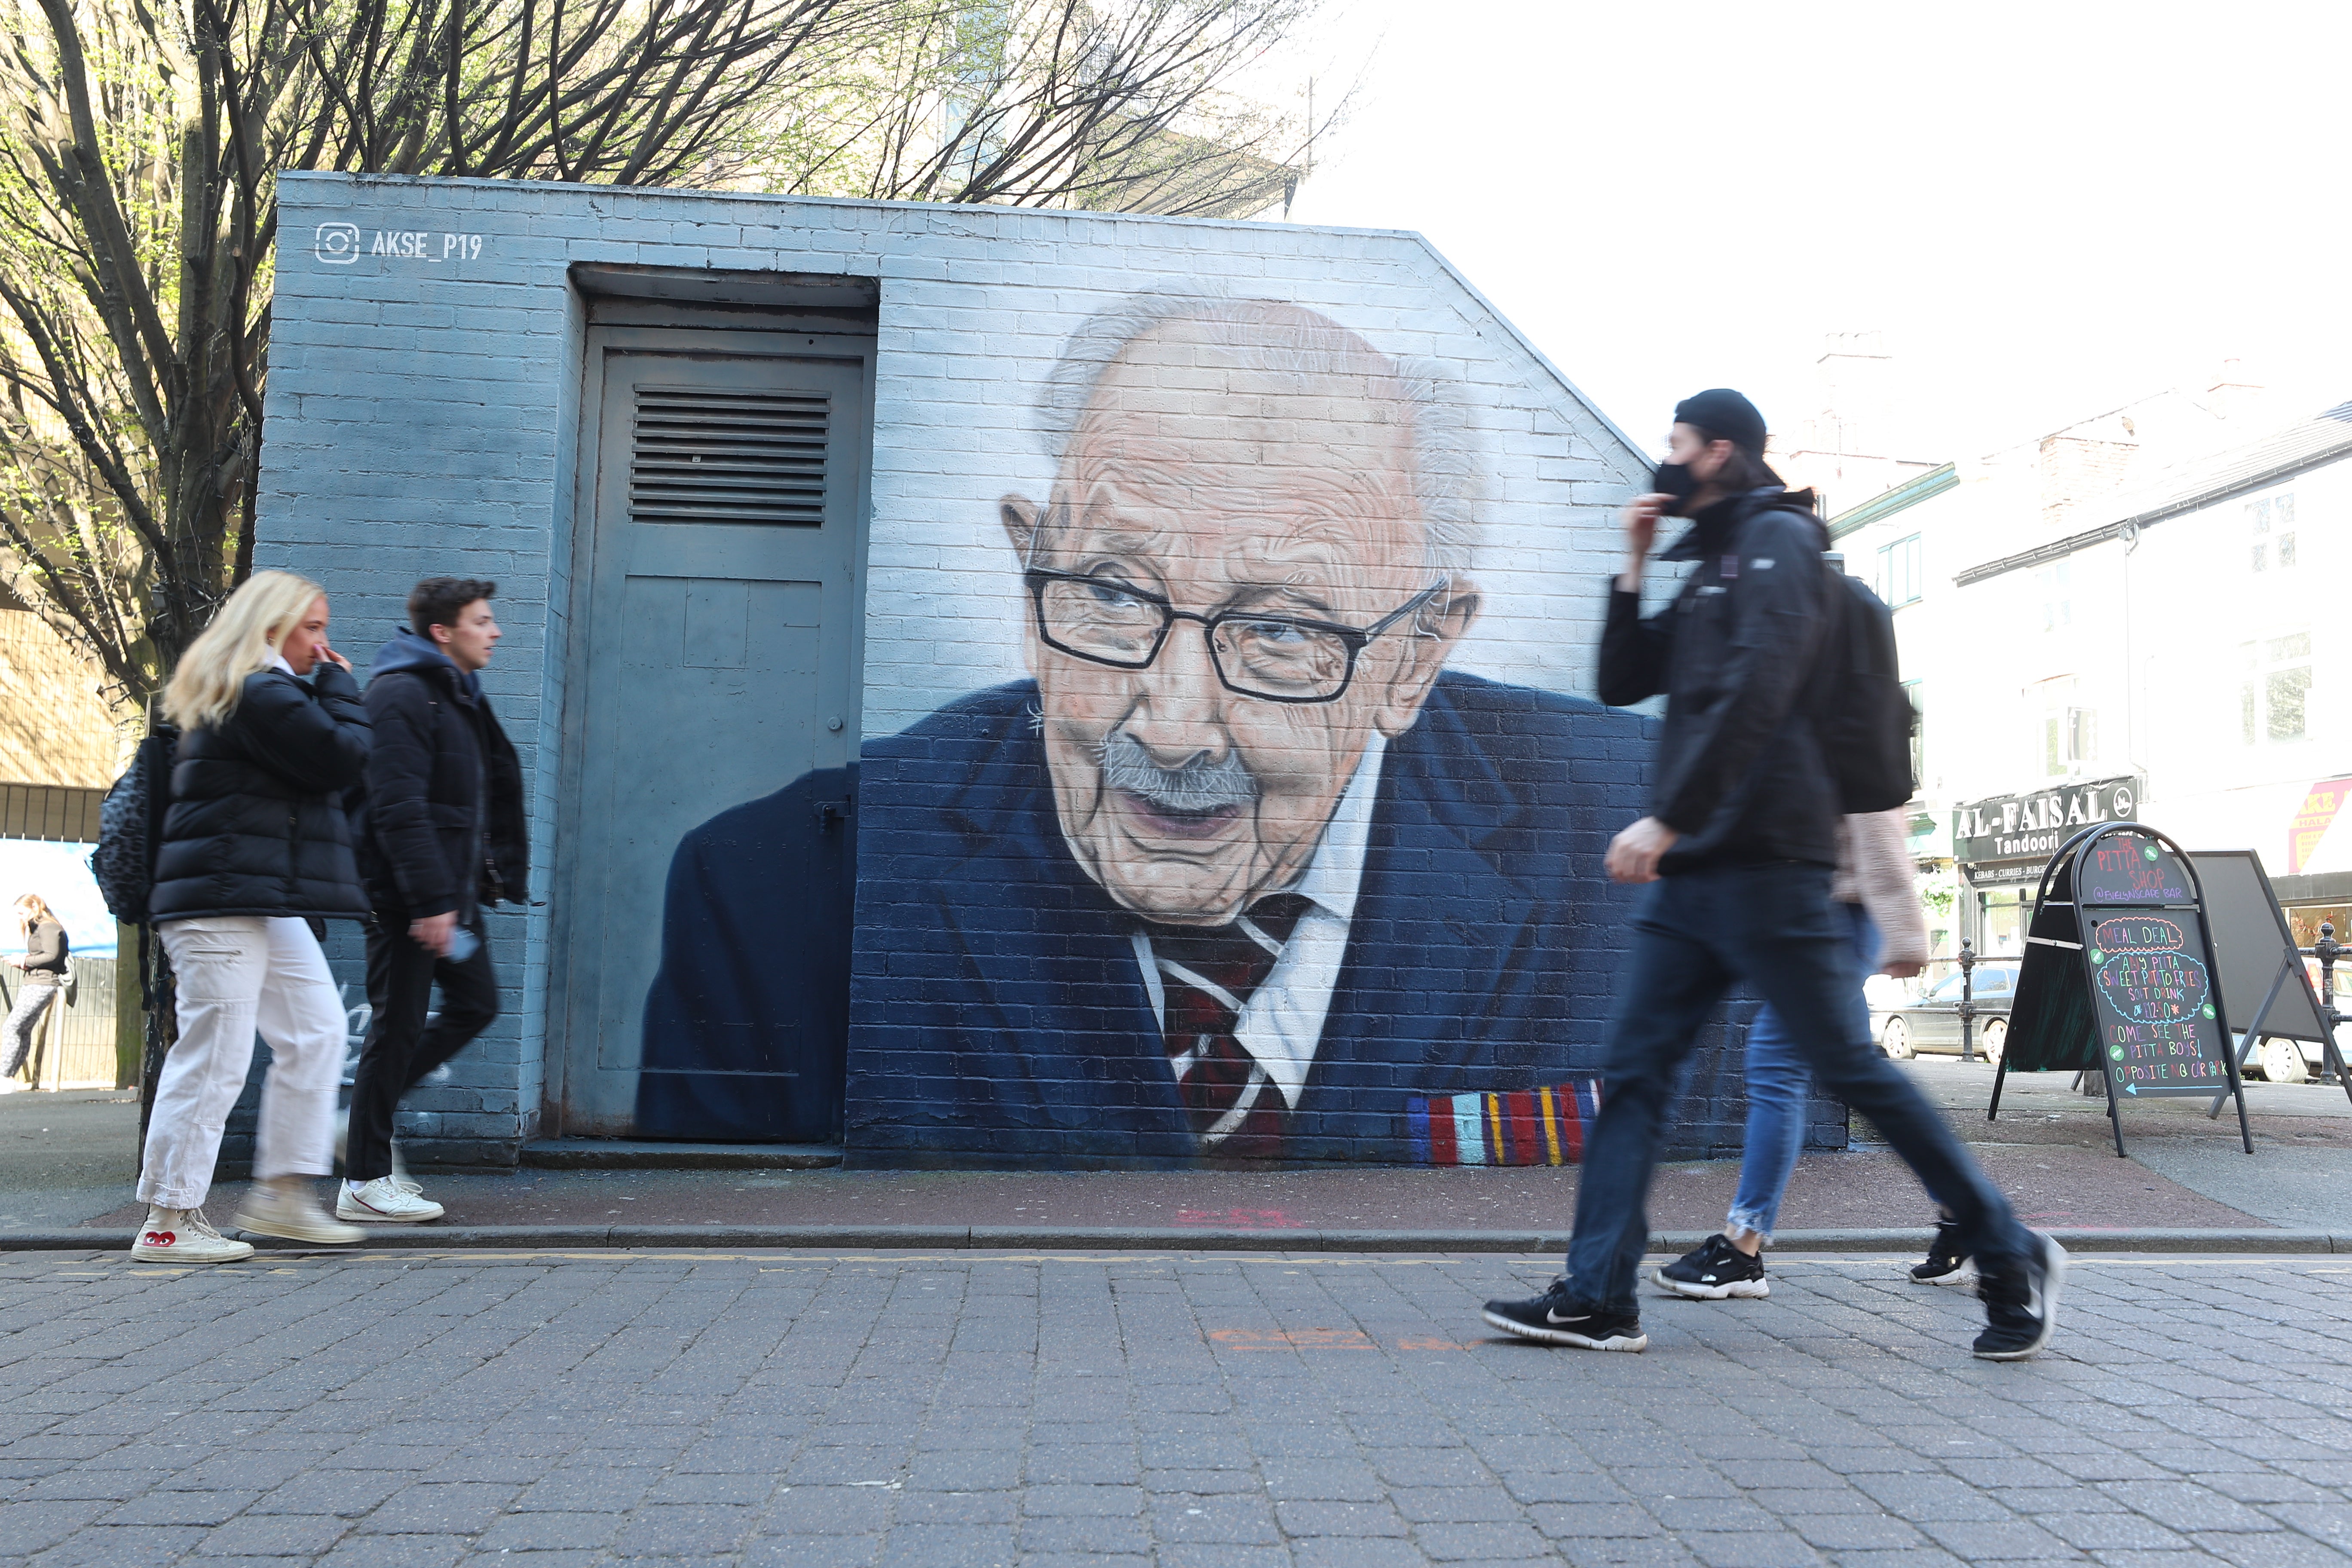 People walk past a mural of Captain Sir Tom Moore by by Street artist Akse P19 in Manchester's North Quarter